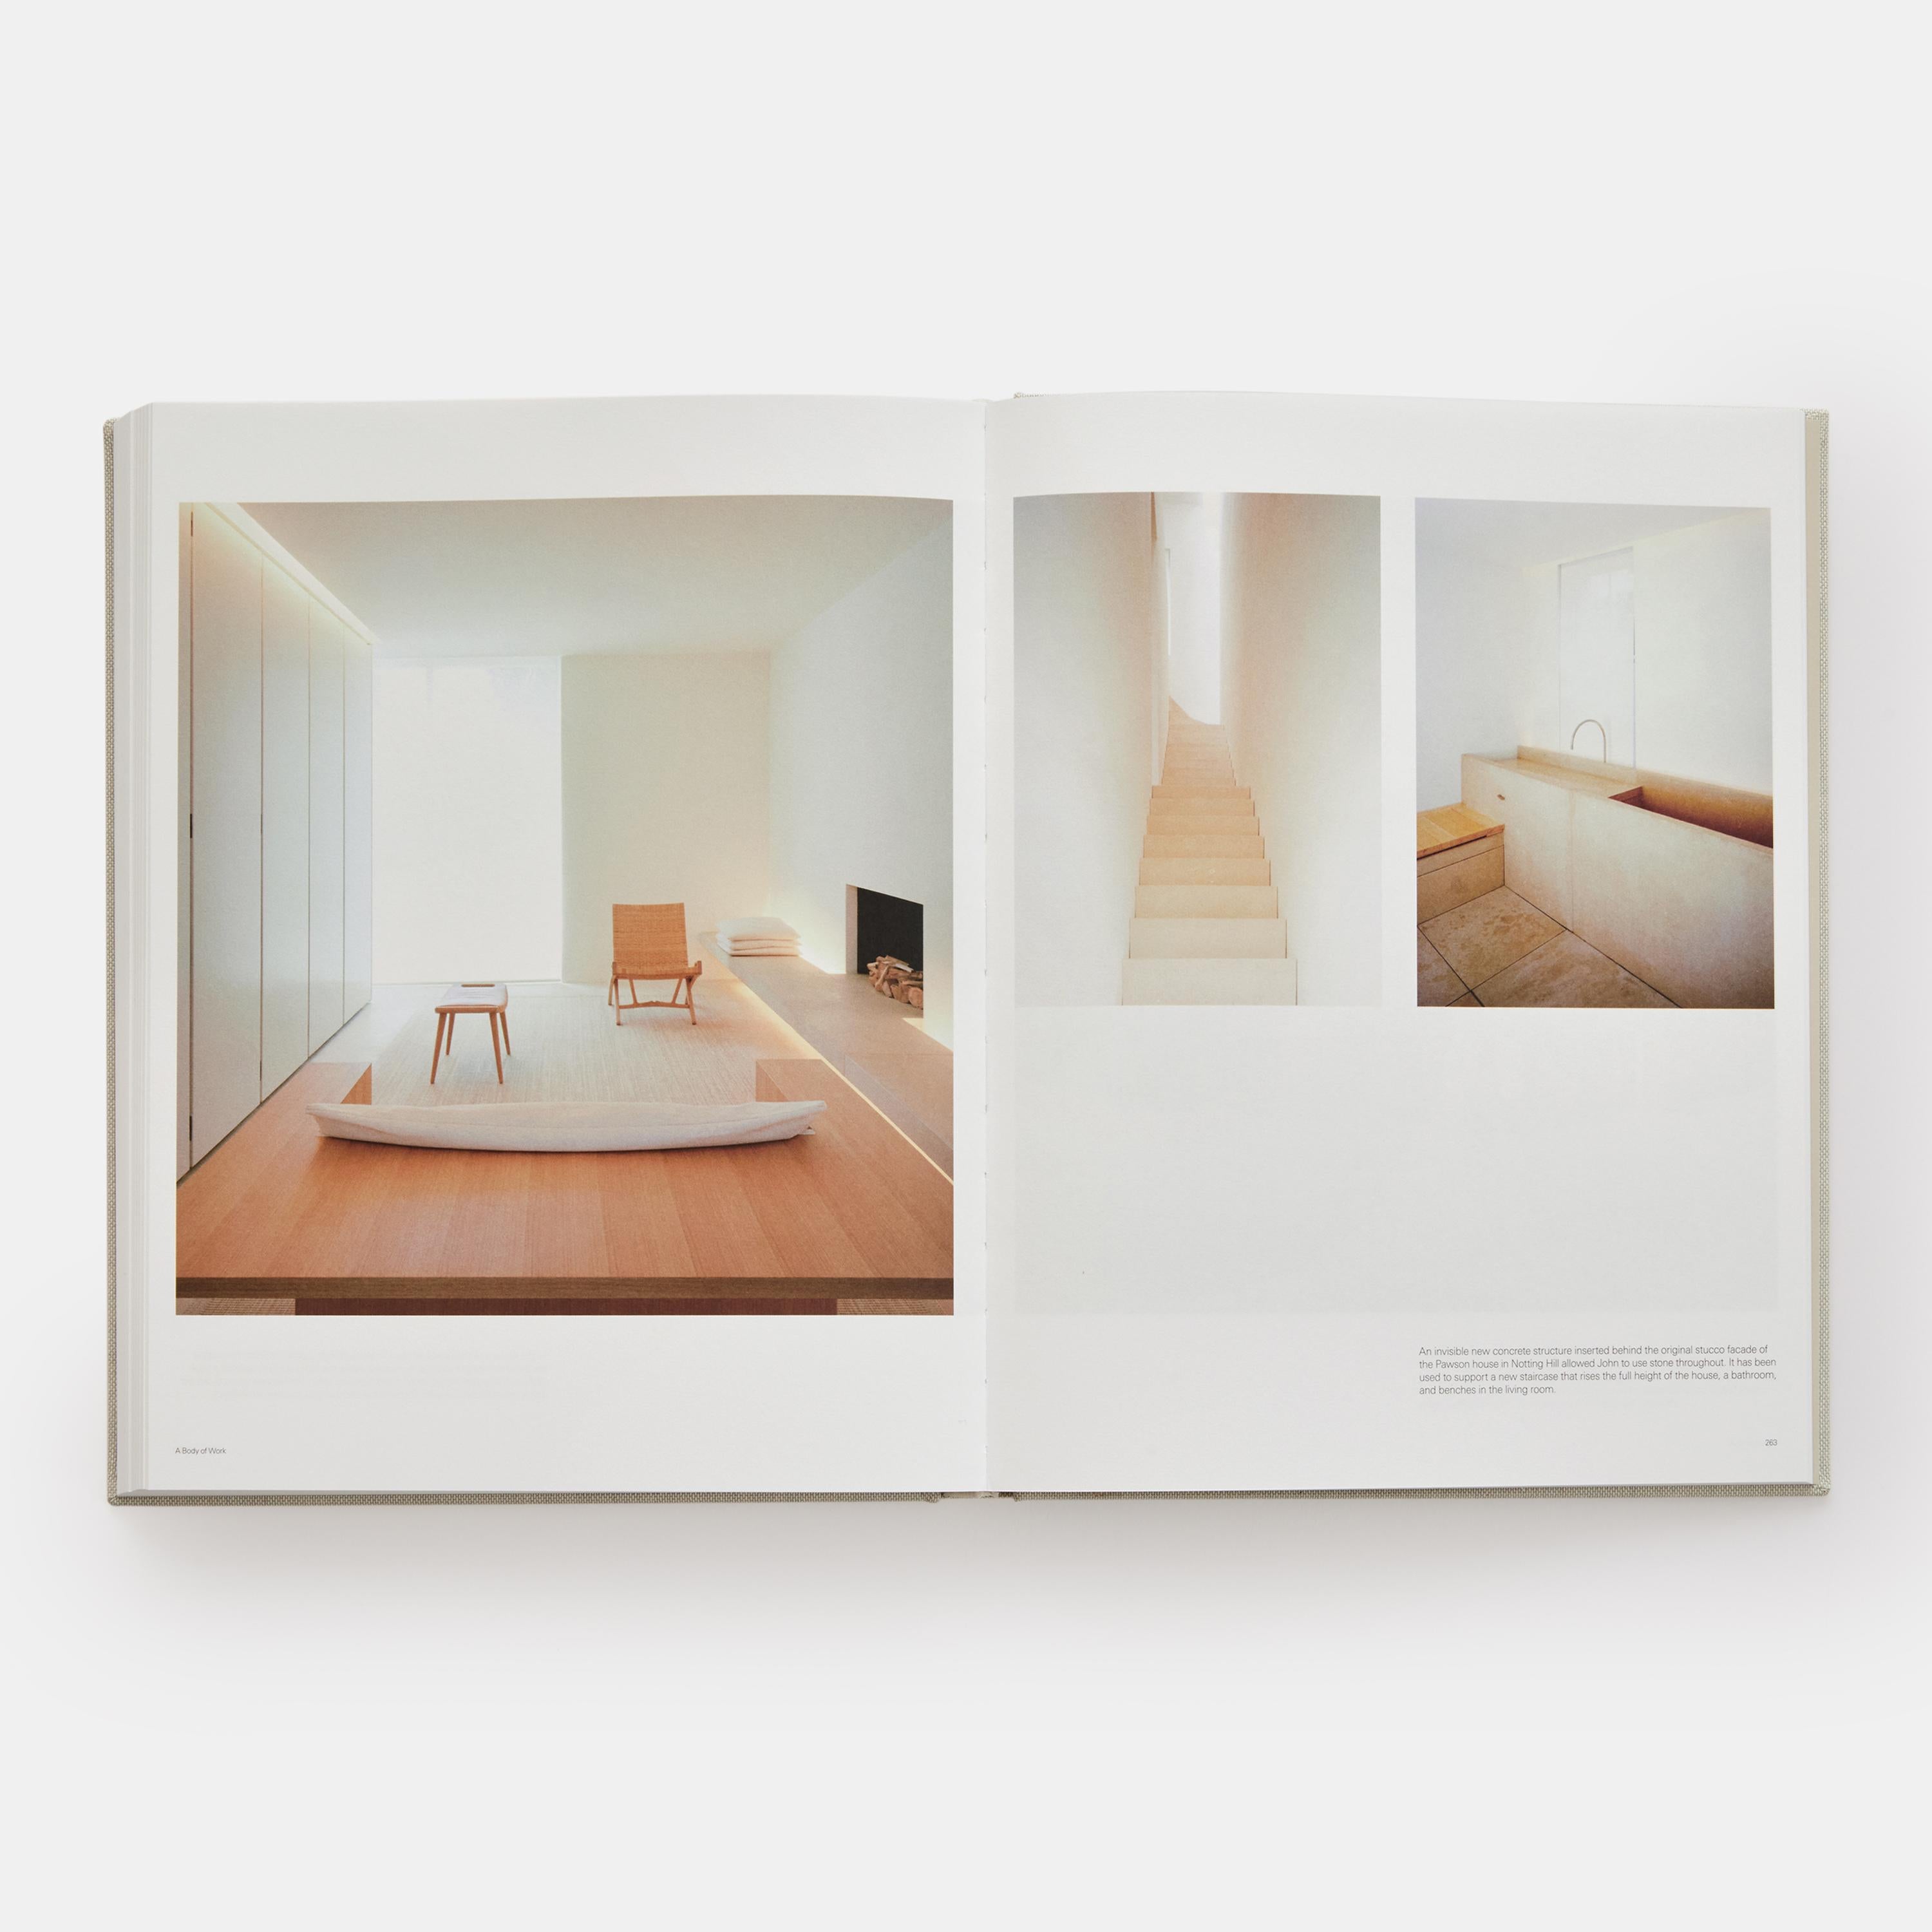 The only comprehensive book on the fascinating life and work of the celebrated architectural designer, John Pawson

This visual biography brings together John Pawson’s architecture, life, clients, travel, photography, design, books, and ideas.